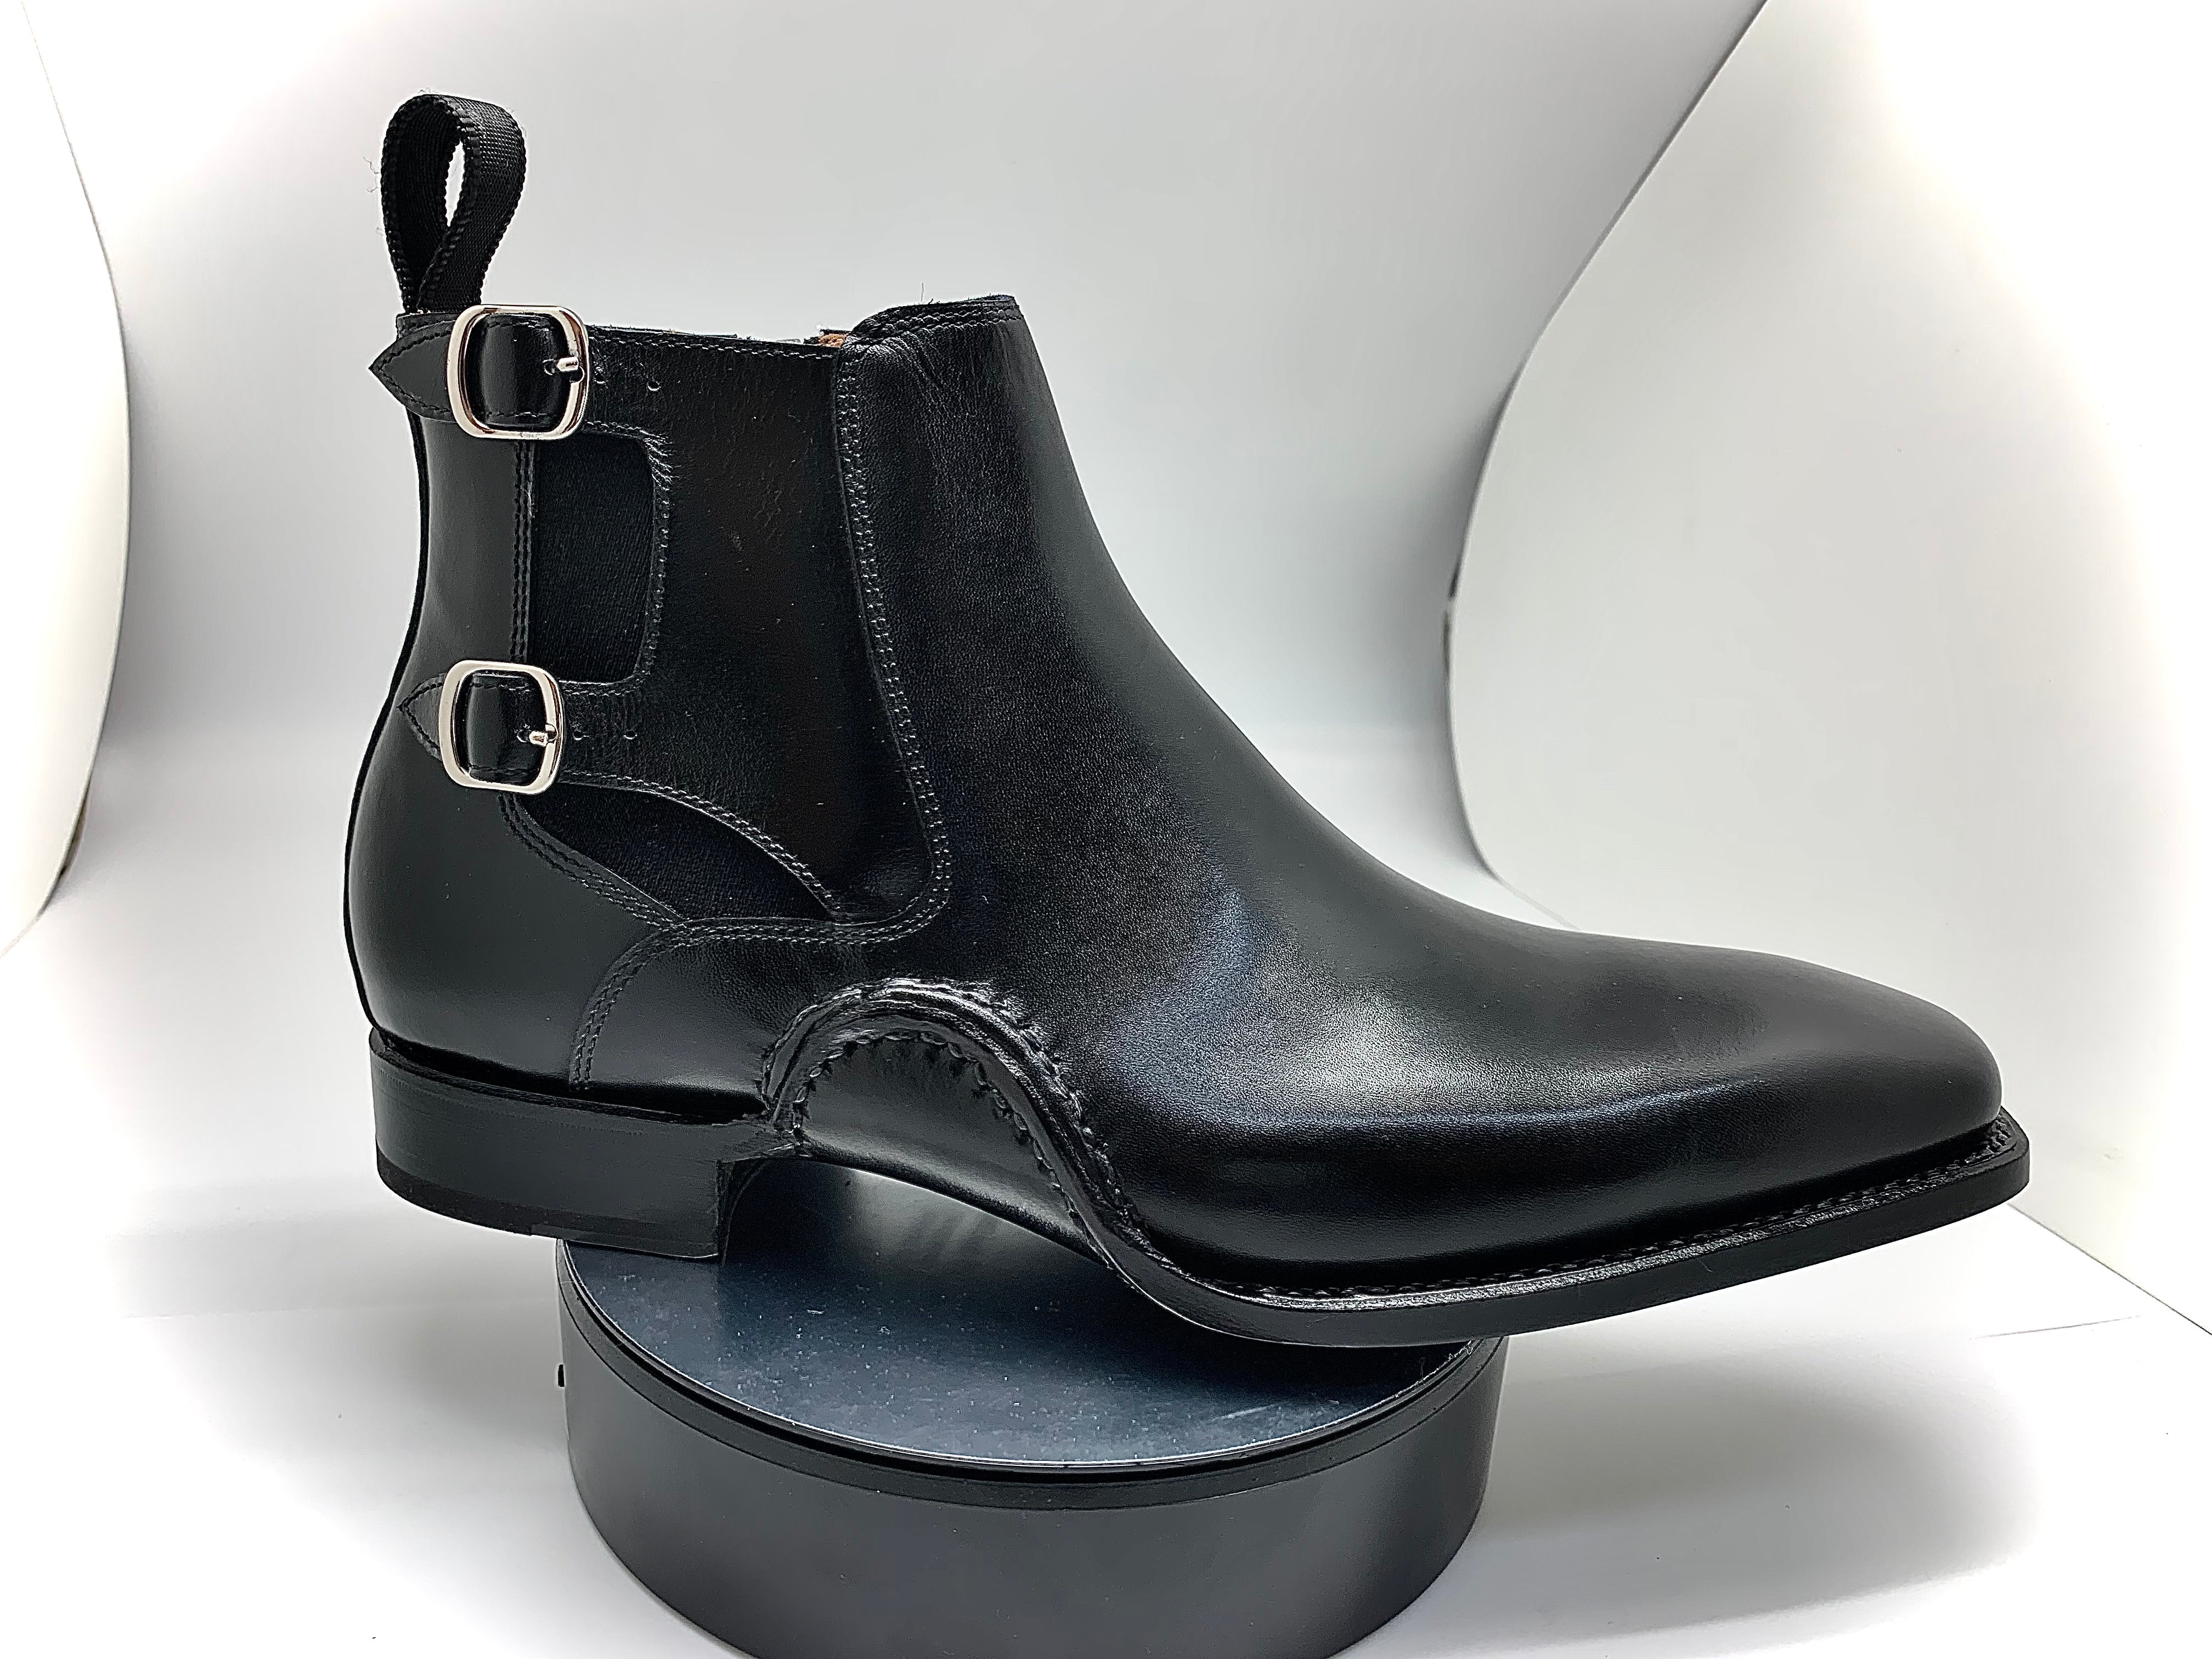 Stitch by Stitch Black Chelsea Boot w/Double Buckle